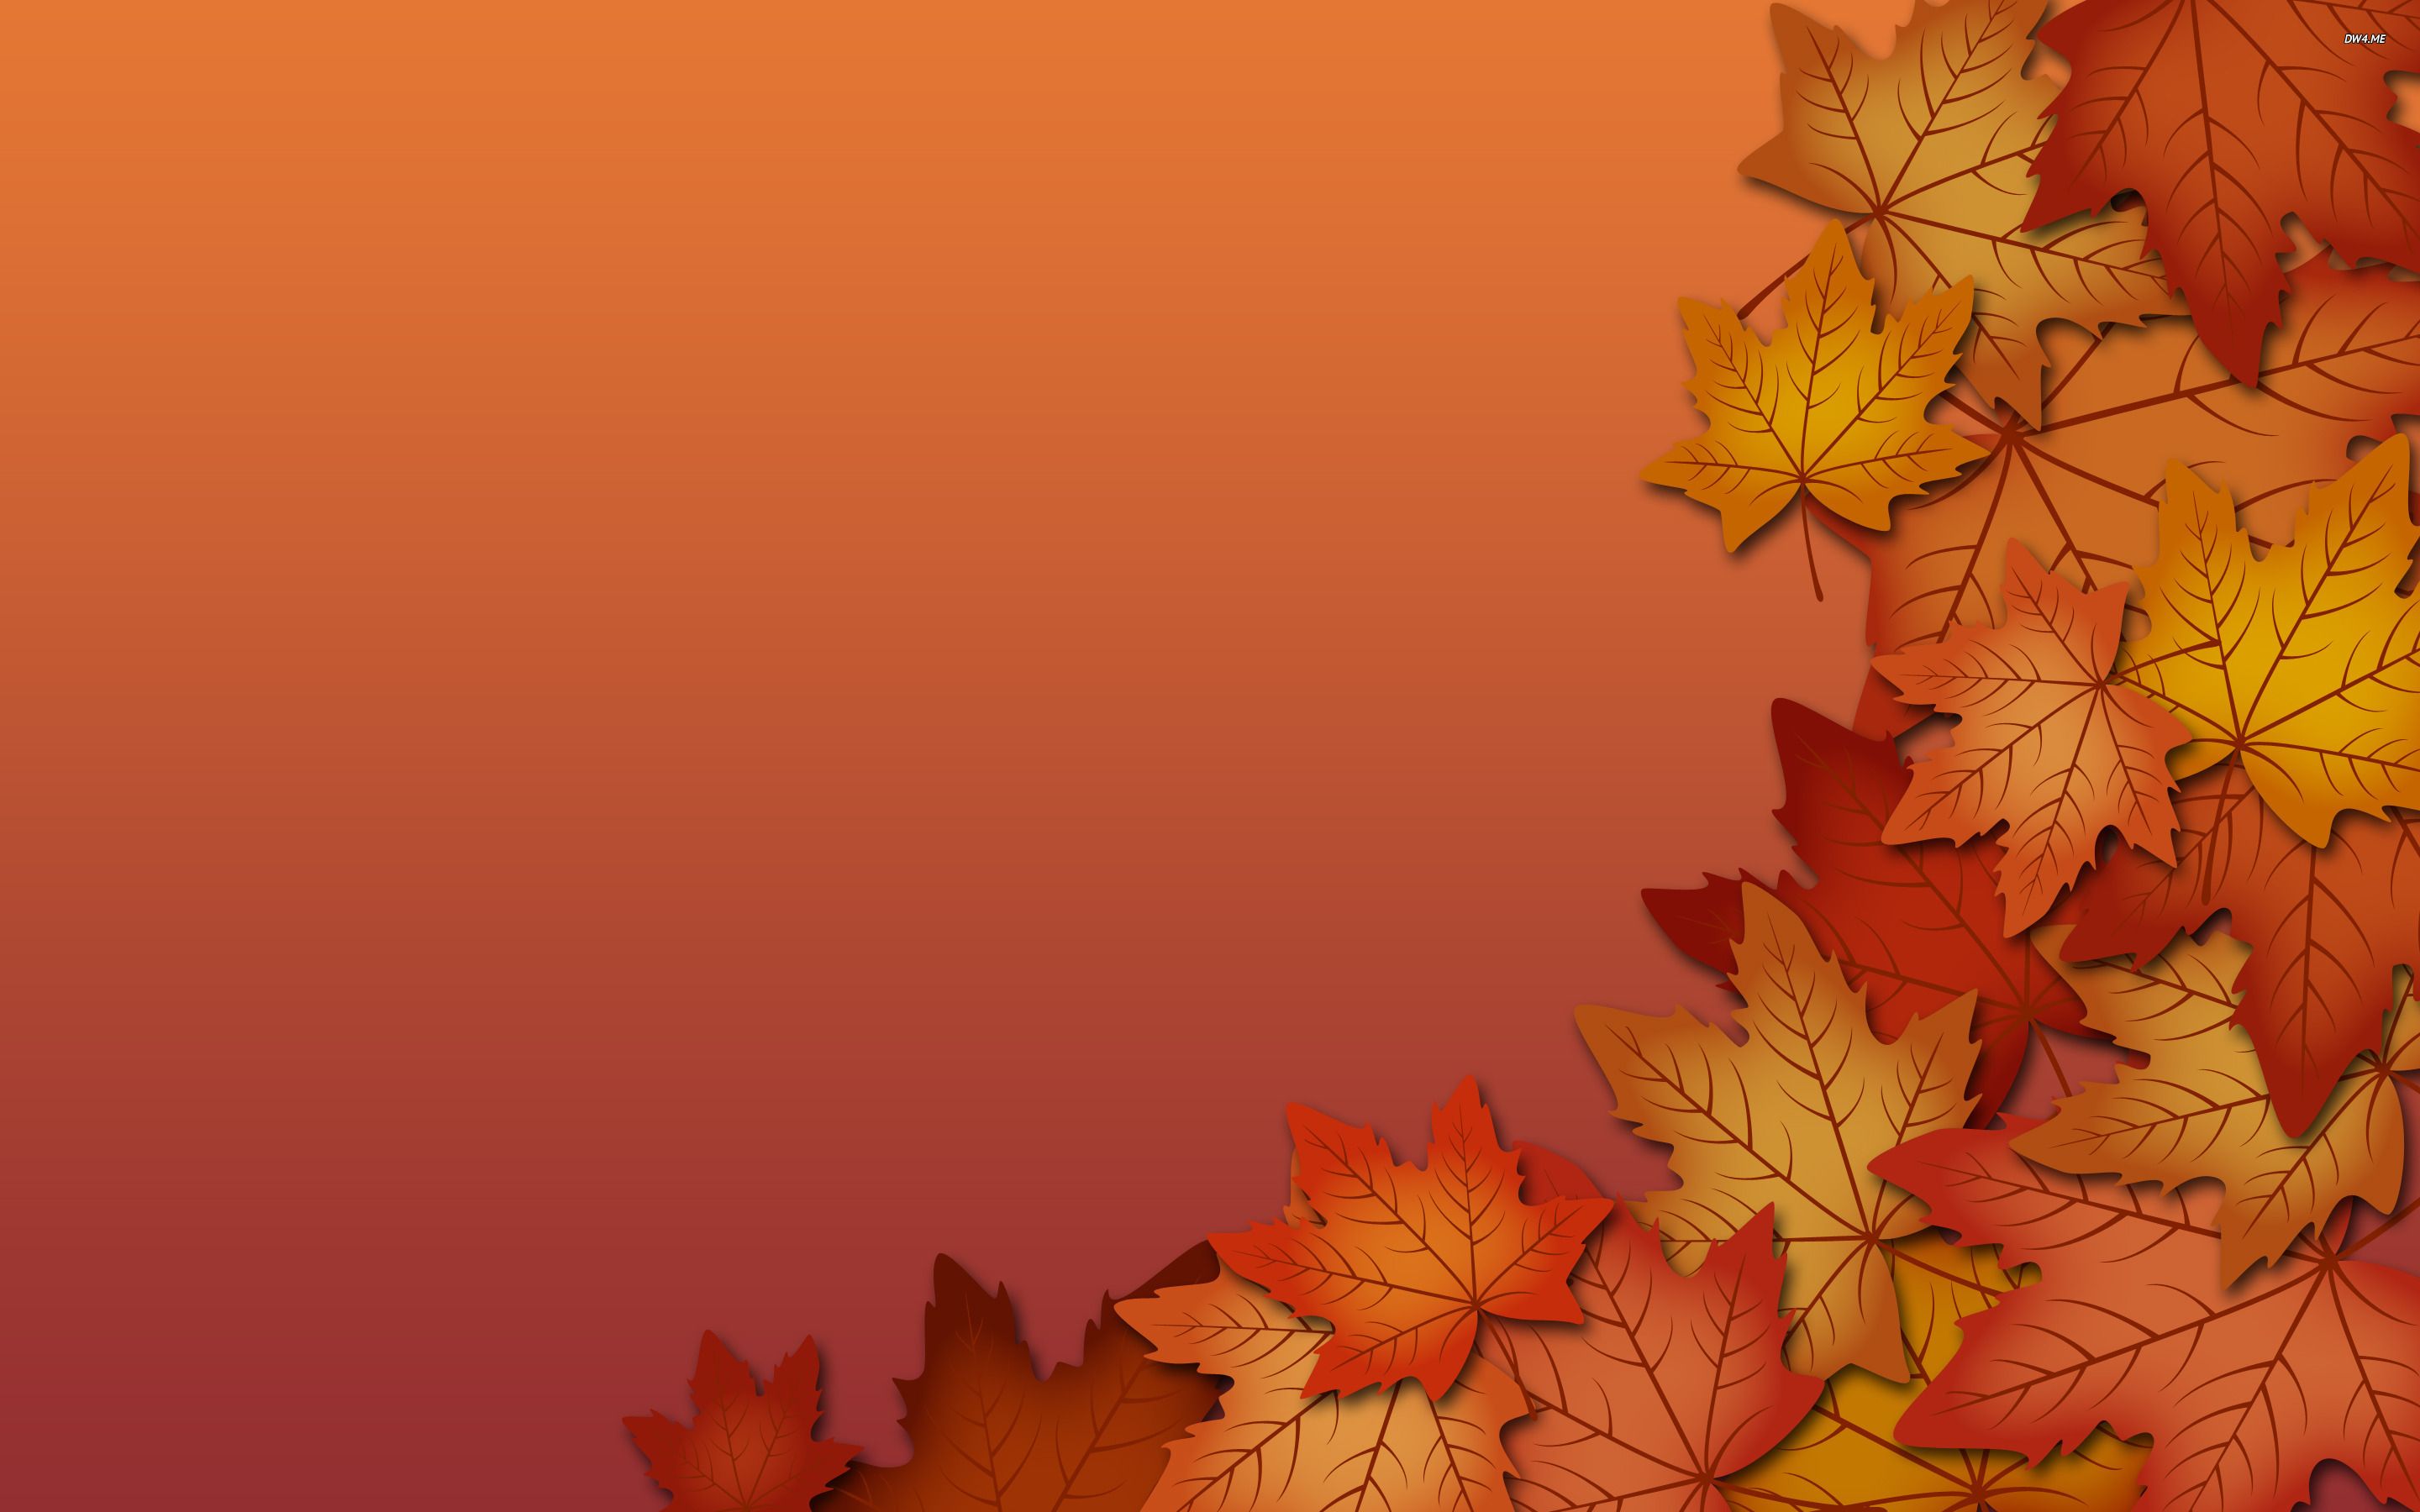 fall wallpaper for computer background. Autumn leaves wallpaper. Fall wallpaper, Autumn leaves wallpaper, Leaf wallpaper